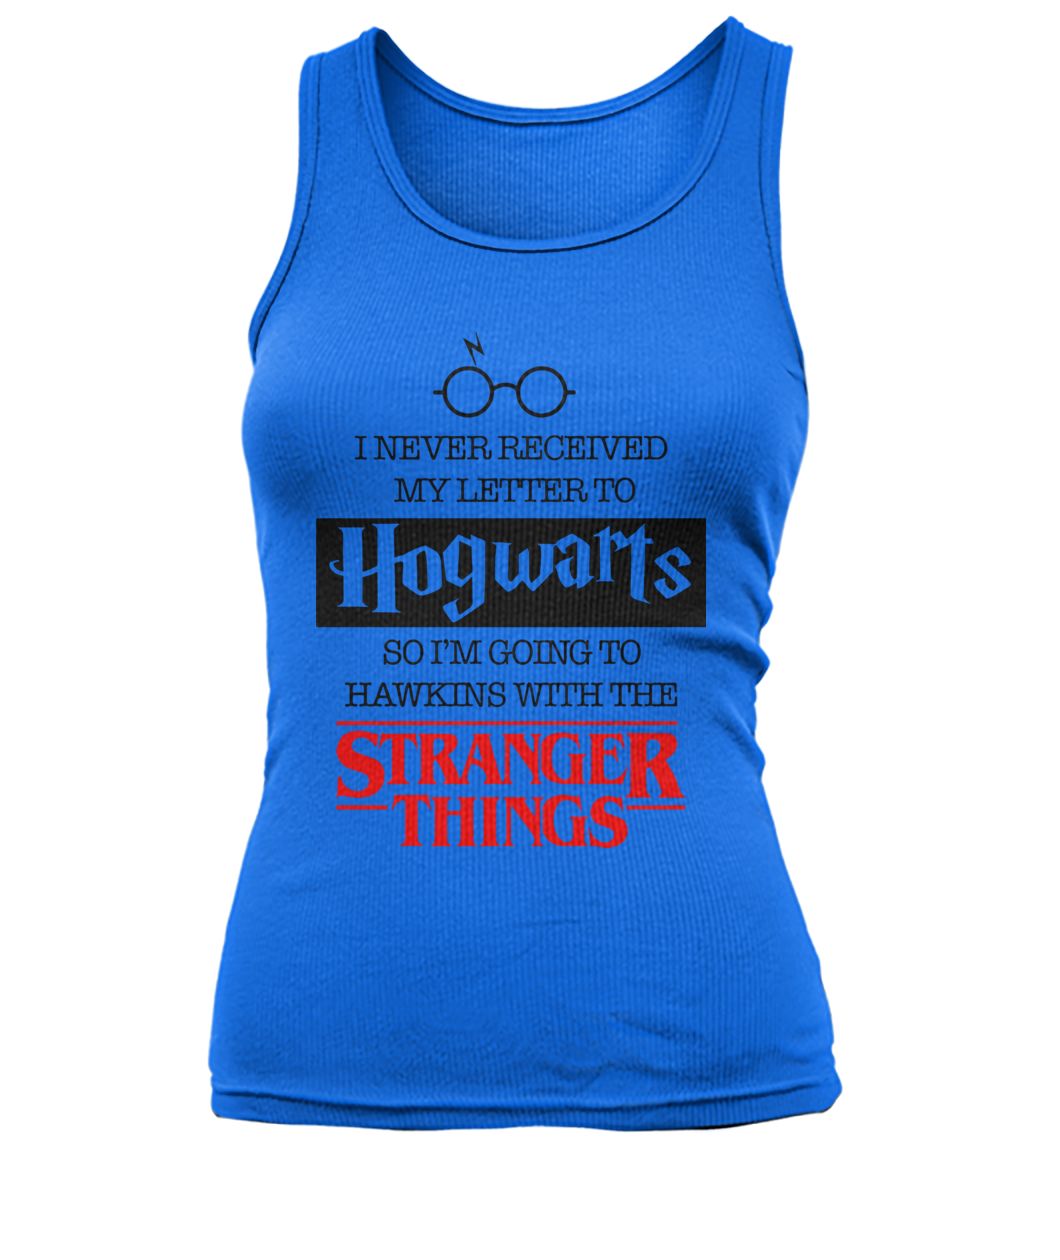 I never received my letter to hogwarts so I’m going to hawkins with the stranger things women's tank top